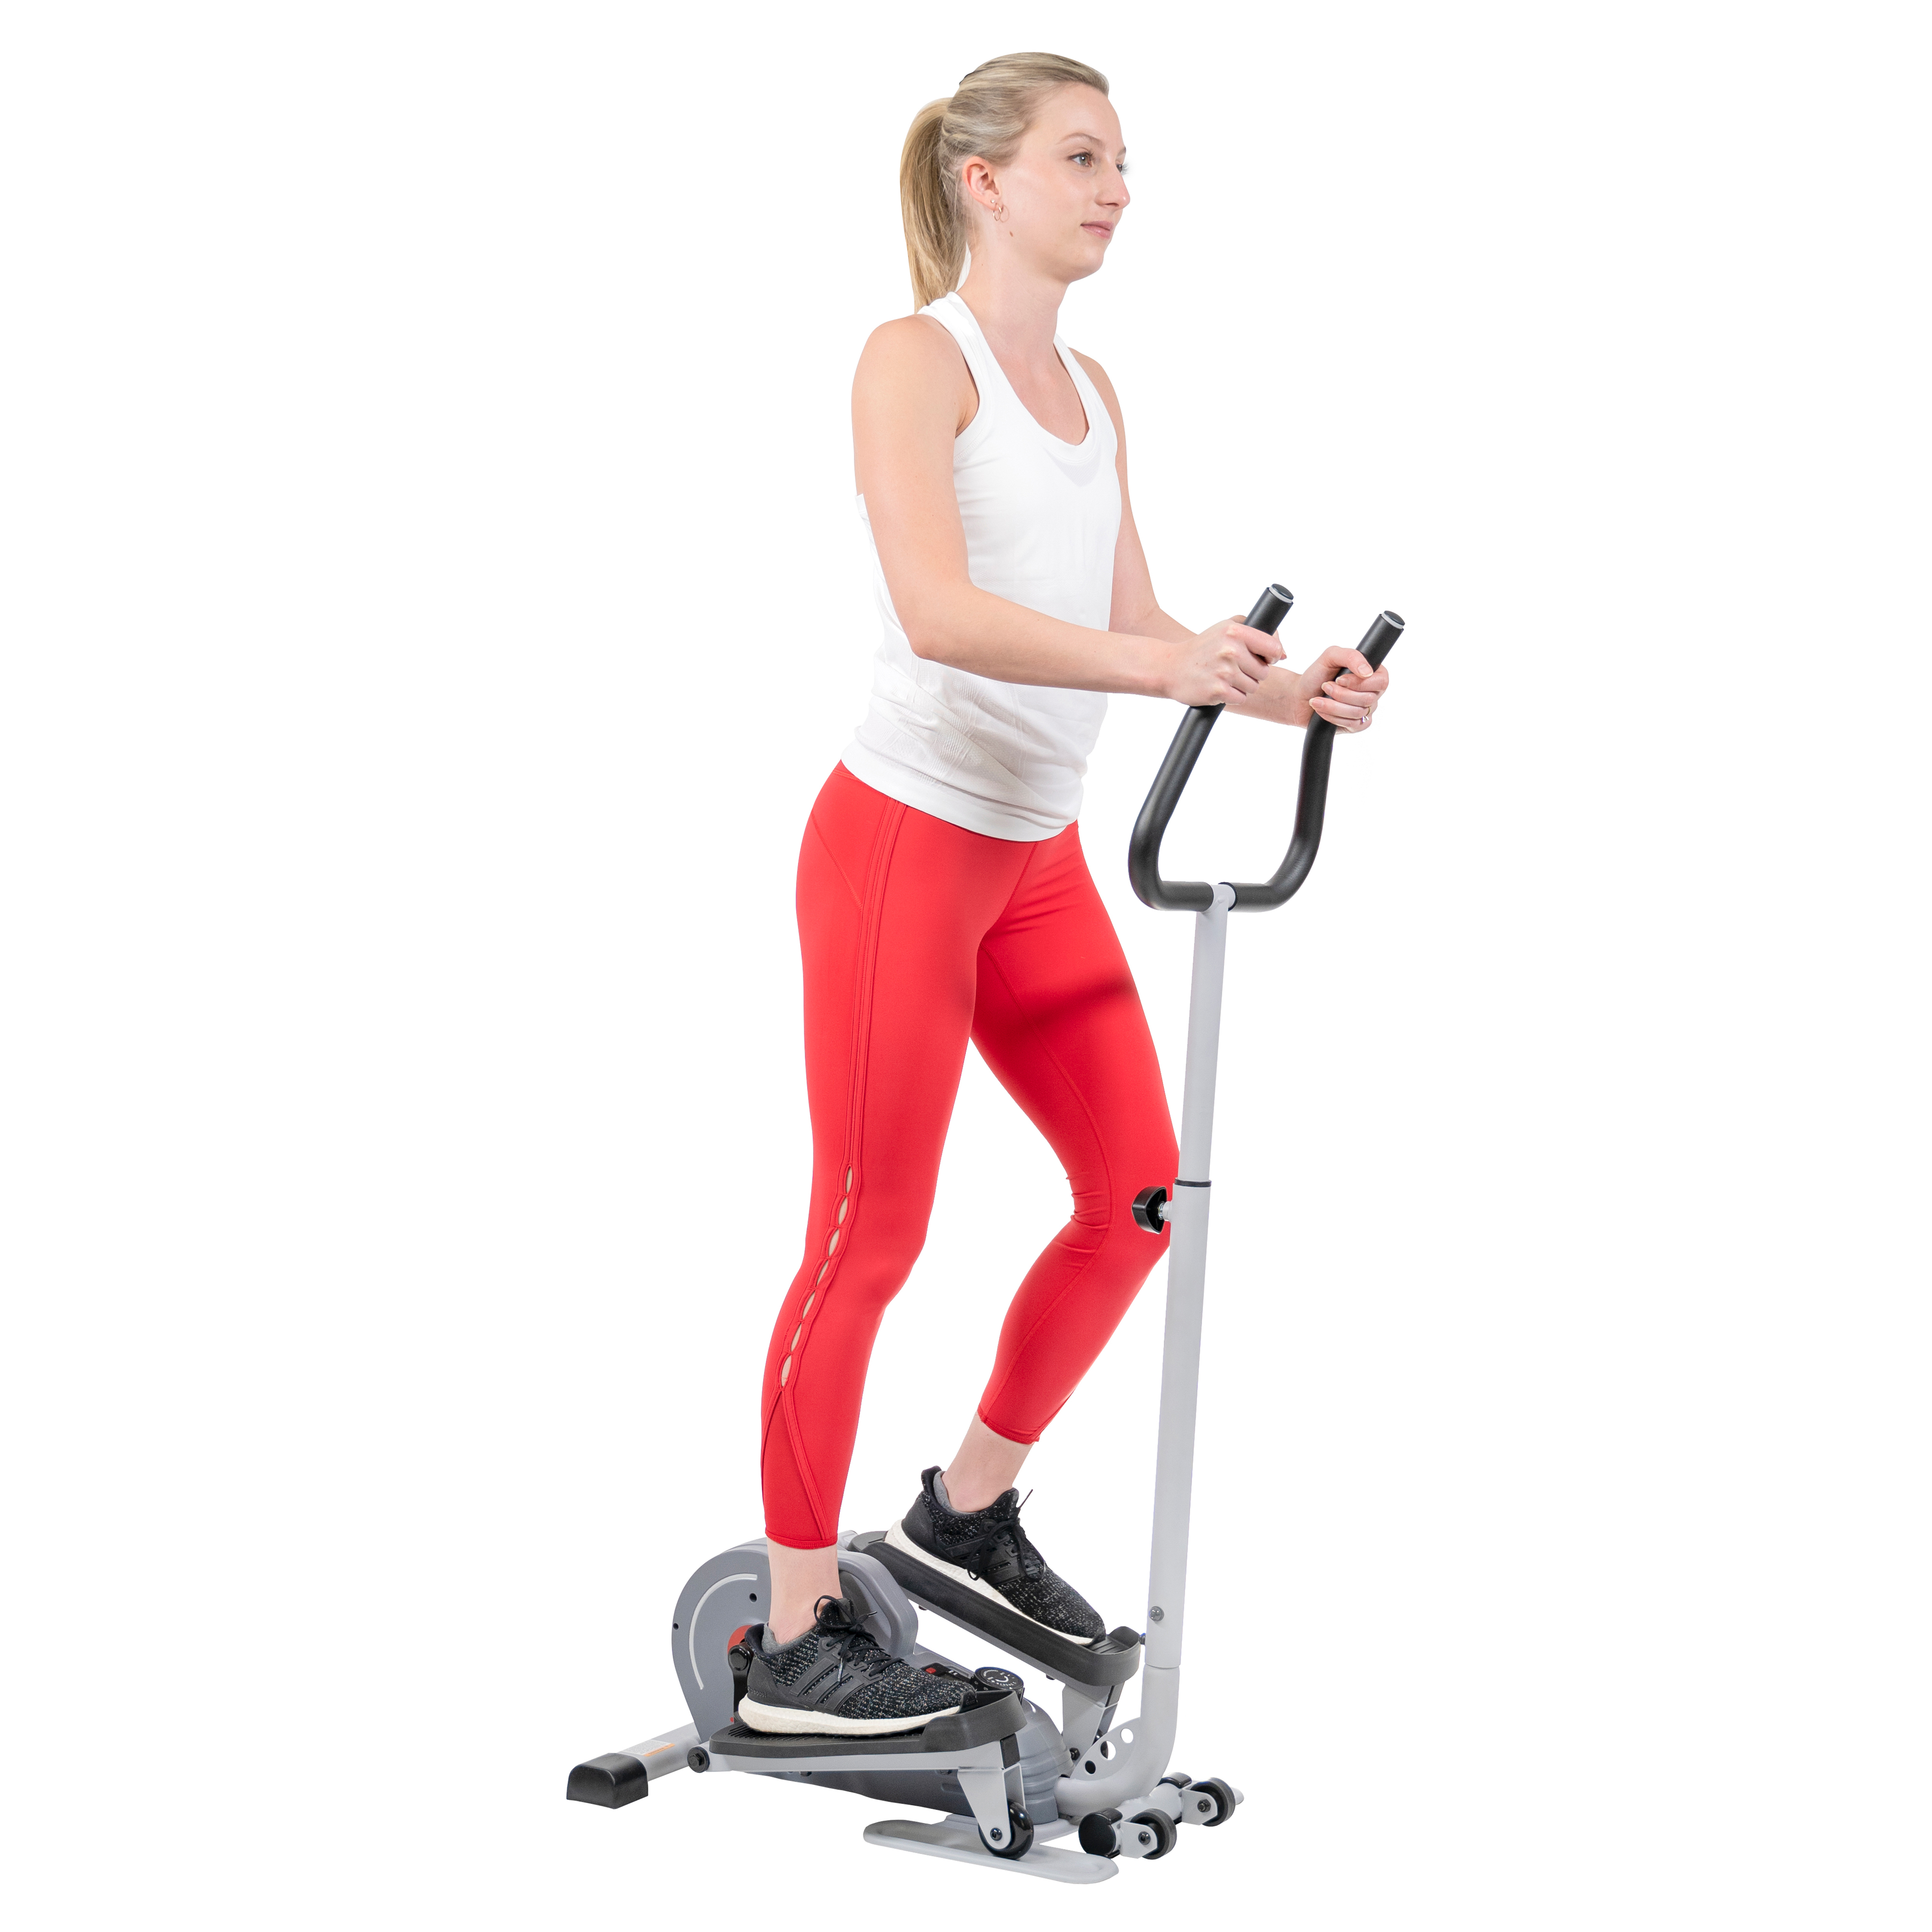 Sunny Health & Fitness Compact Magnetic Standing Elliptical Machine w/ Handlebars - Portable Workout Stepper for Home, SF-E3988 - image 1 of 18